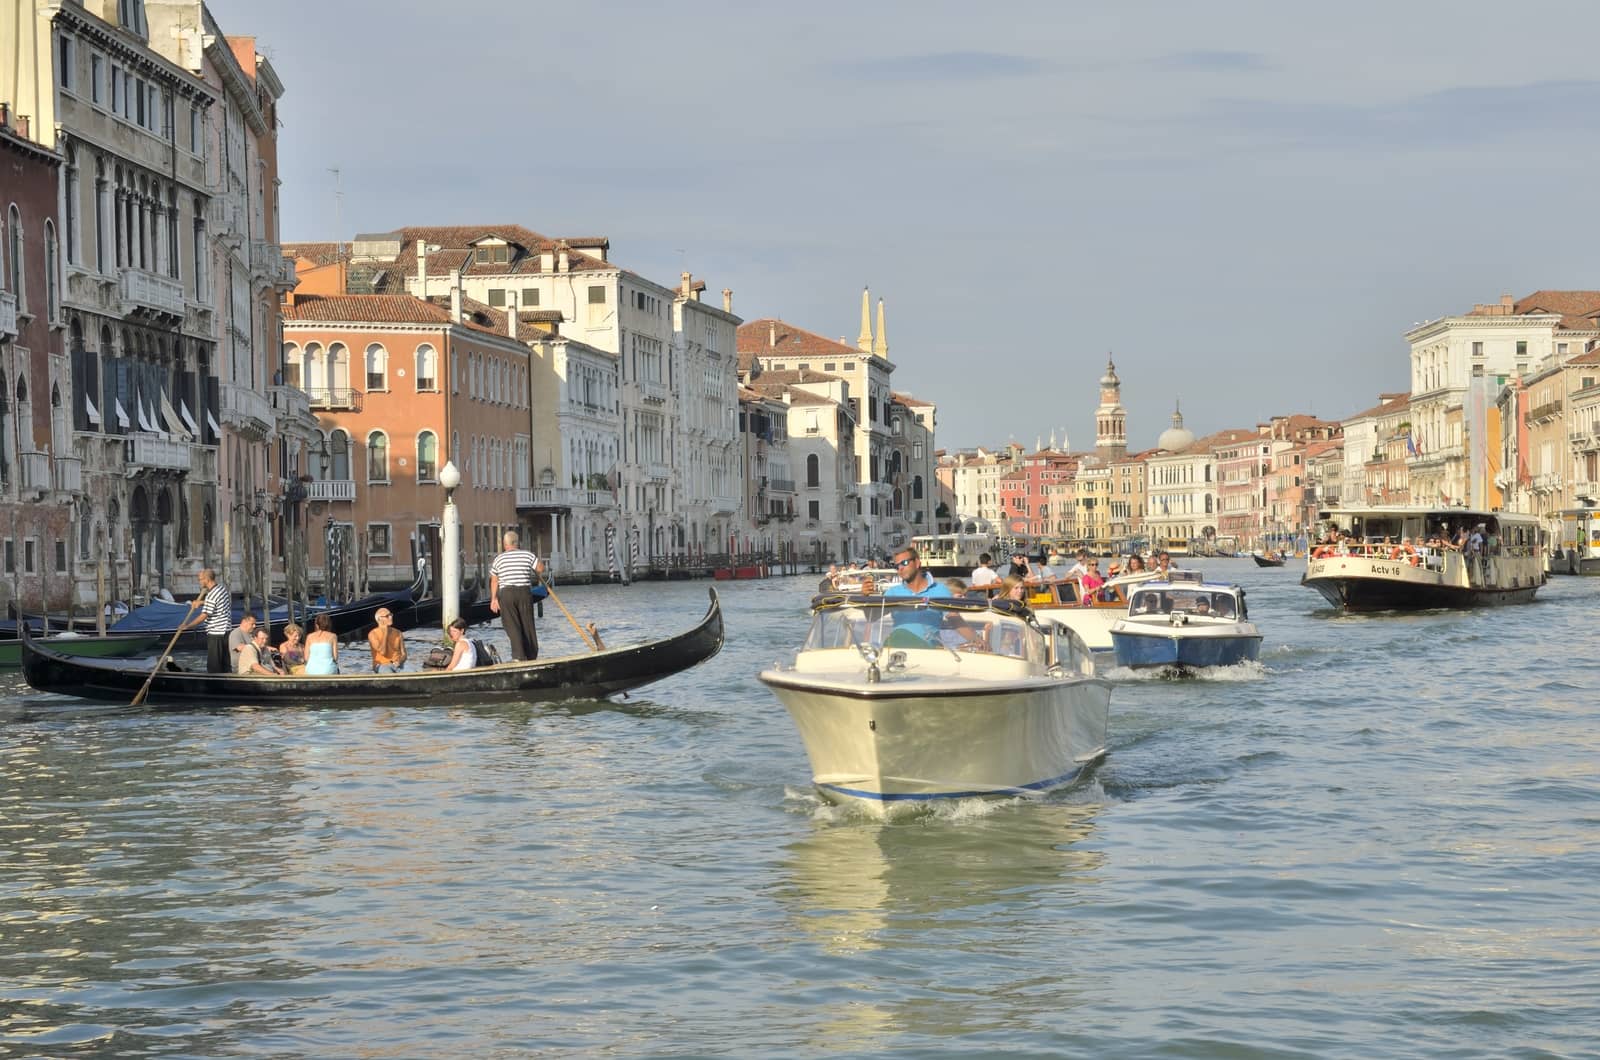 A lot of boats sailing on the Grand Canal in Venice.